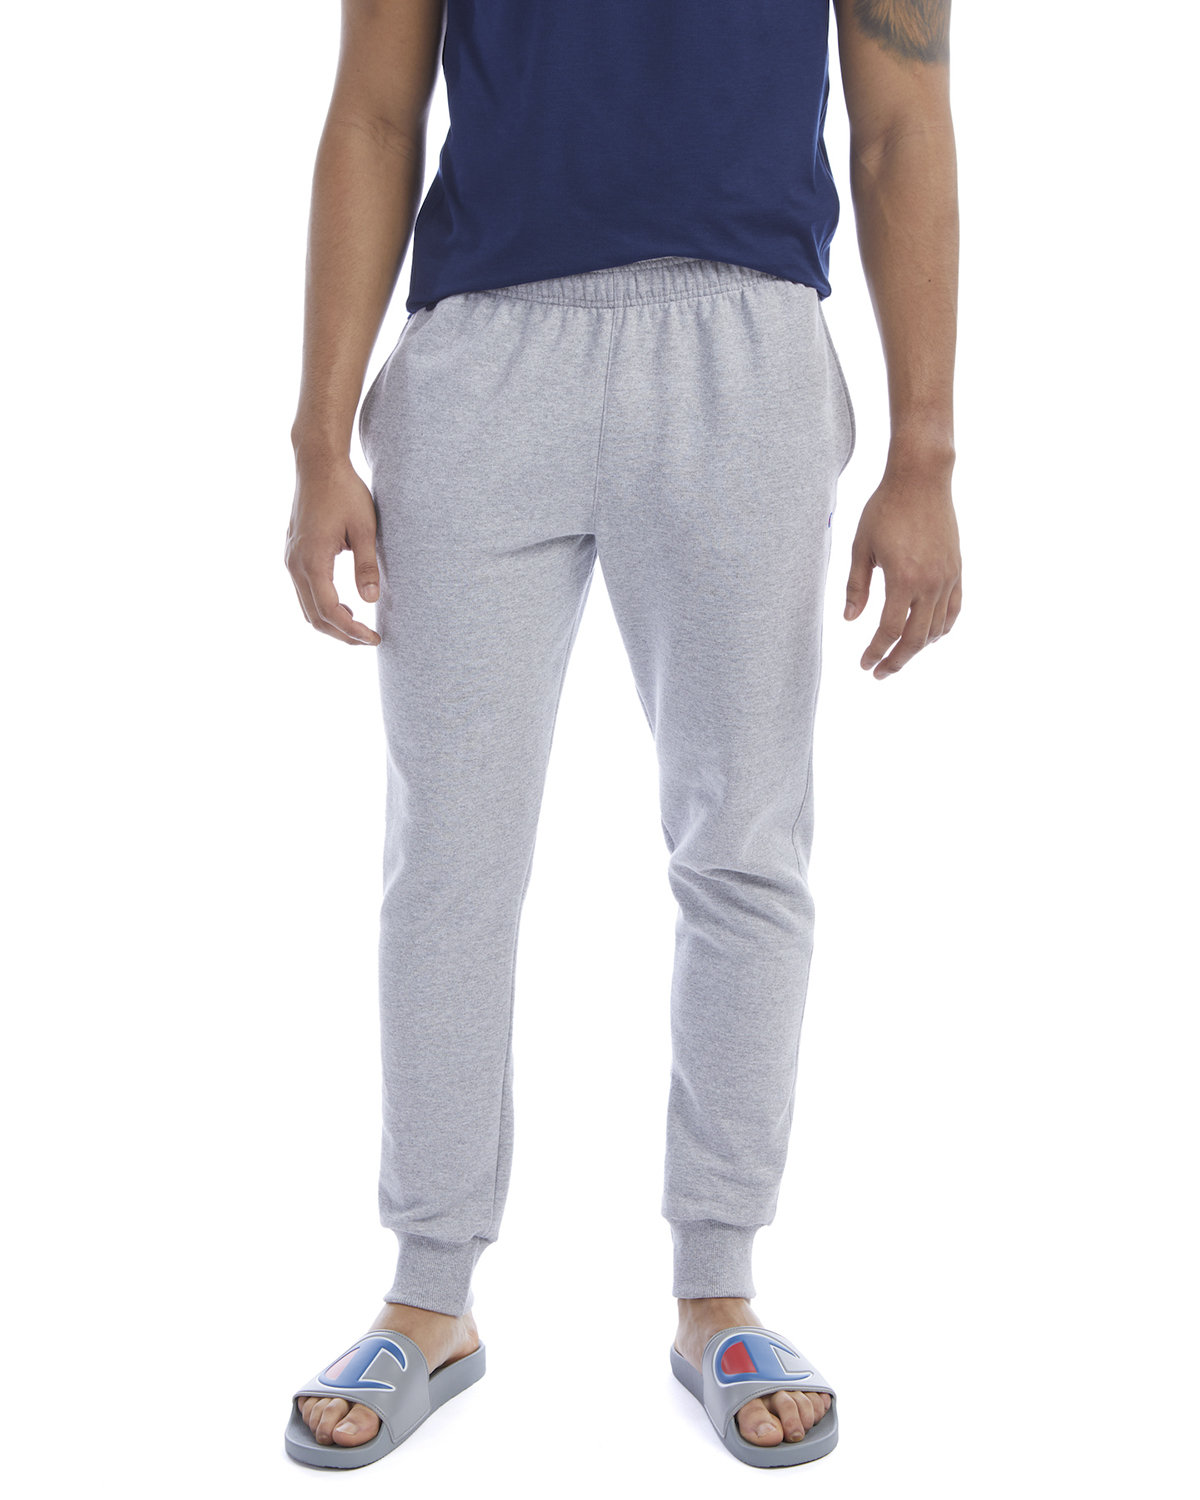 Power Blend Sweatpants with Bowdoin on Leg from Champion – The Bowdoin Store